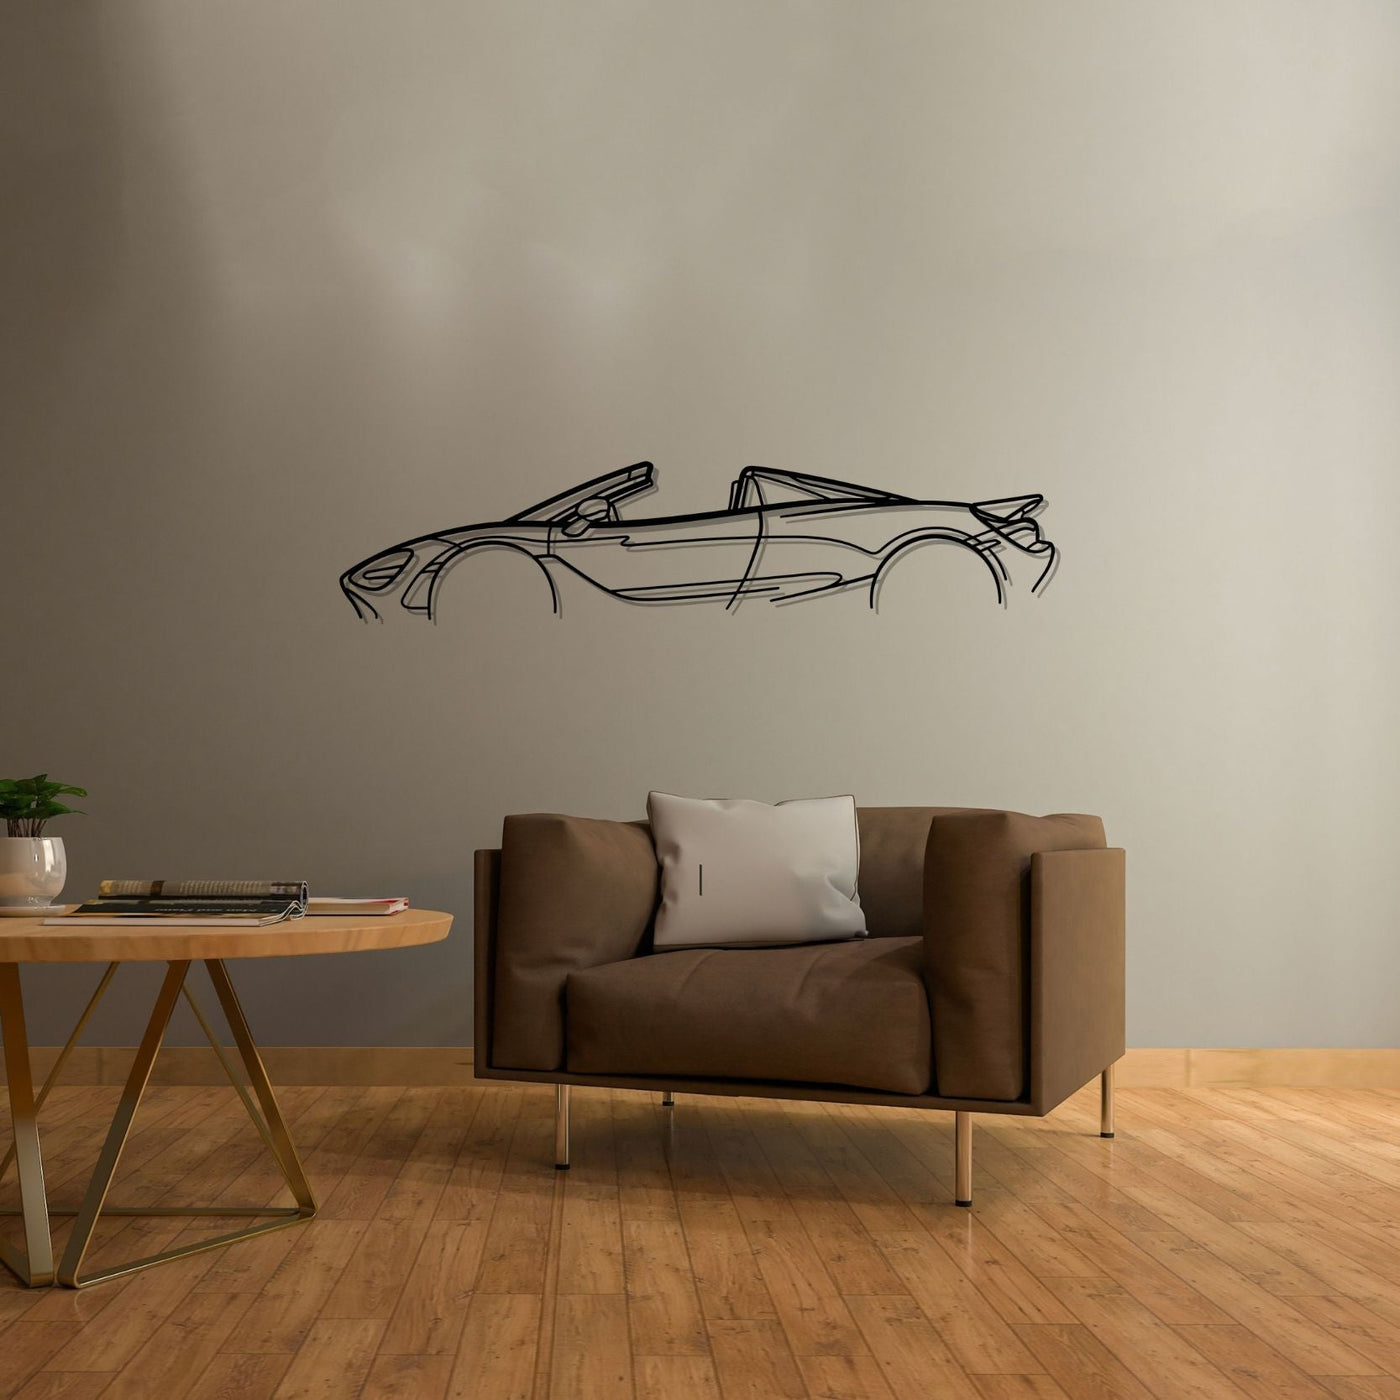 720S Spider 2022 Classic Silhouette Metal Wall Art